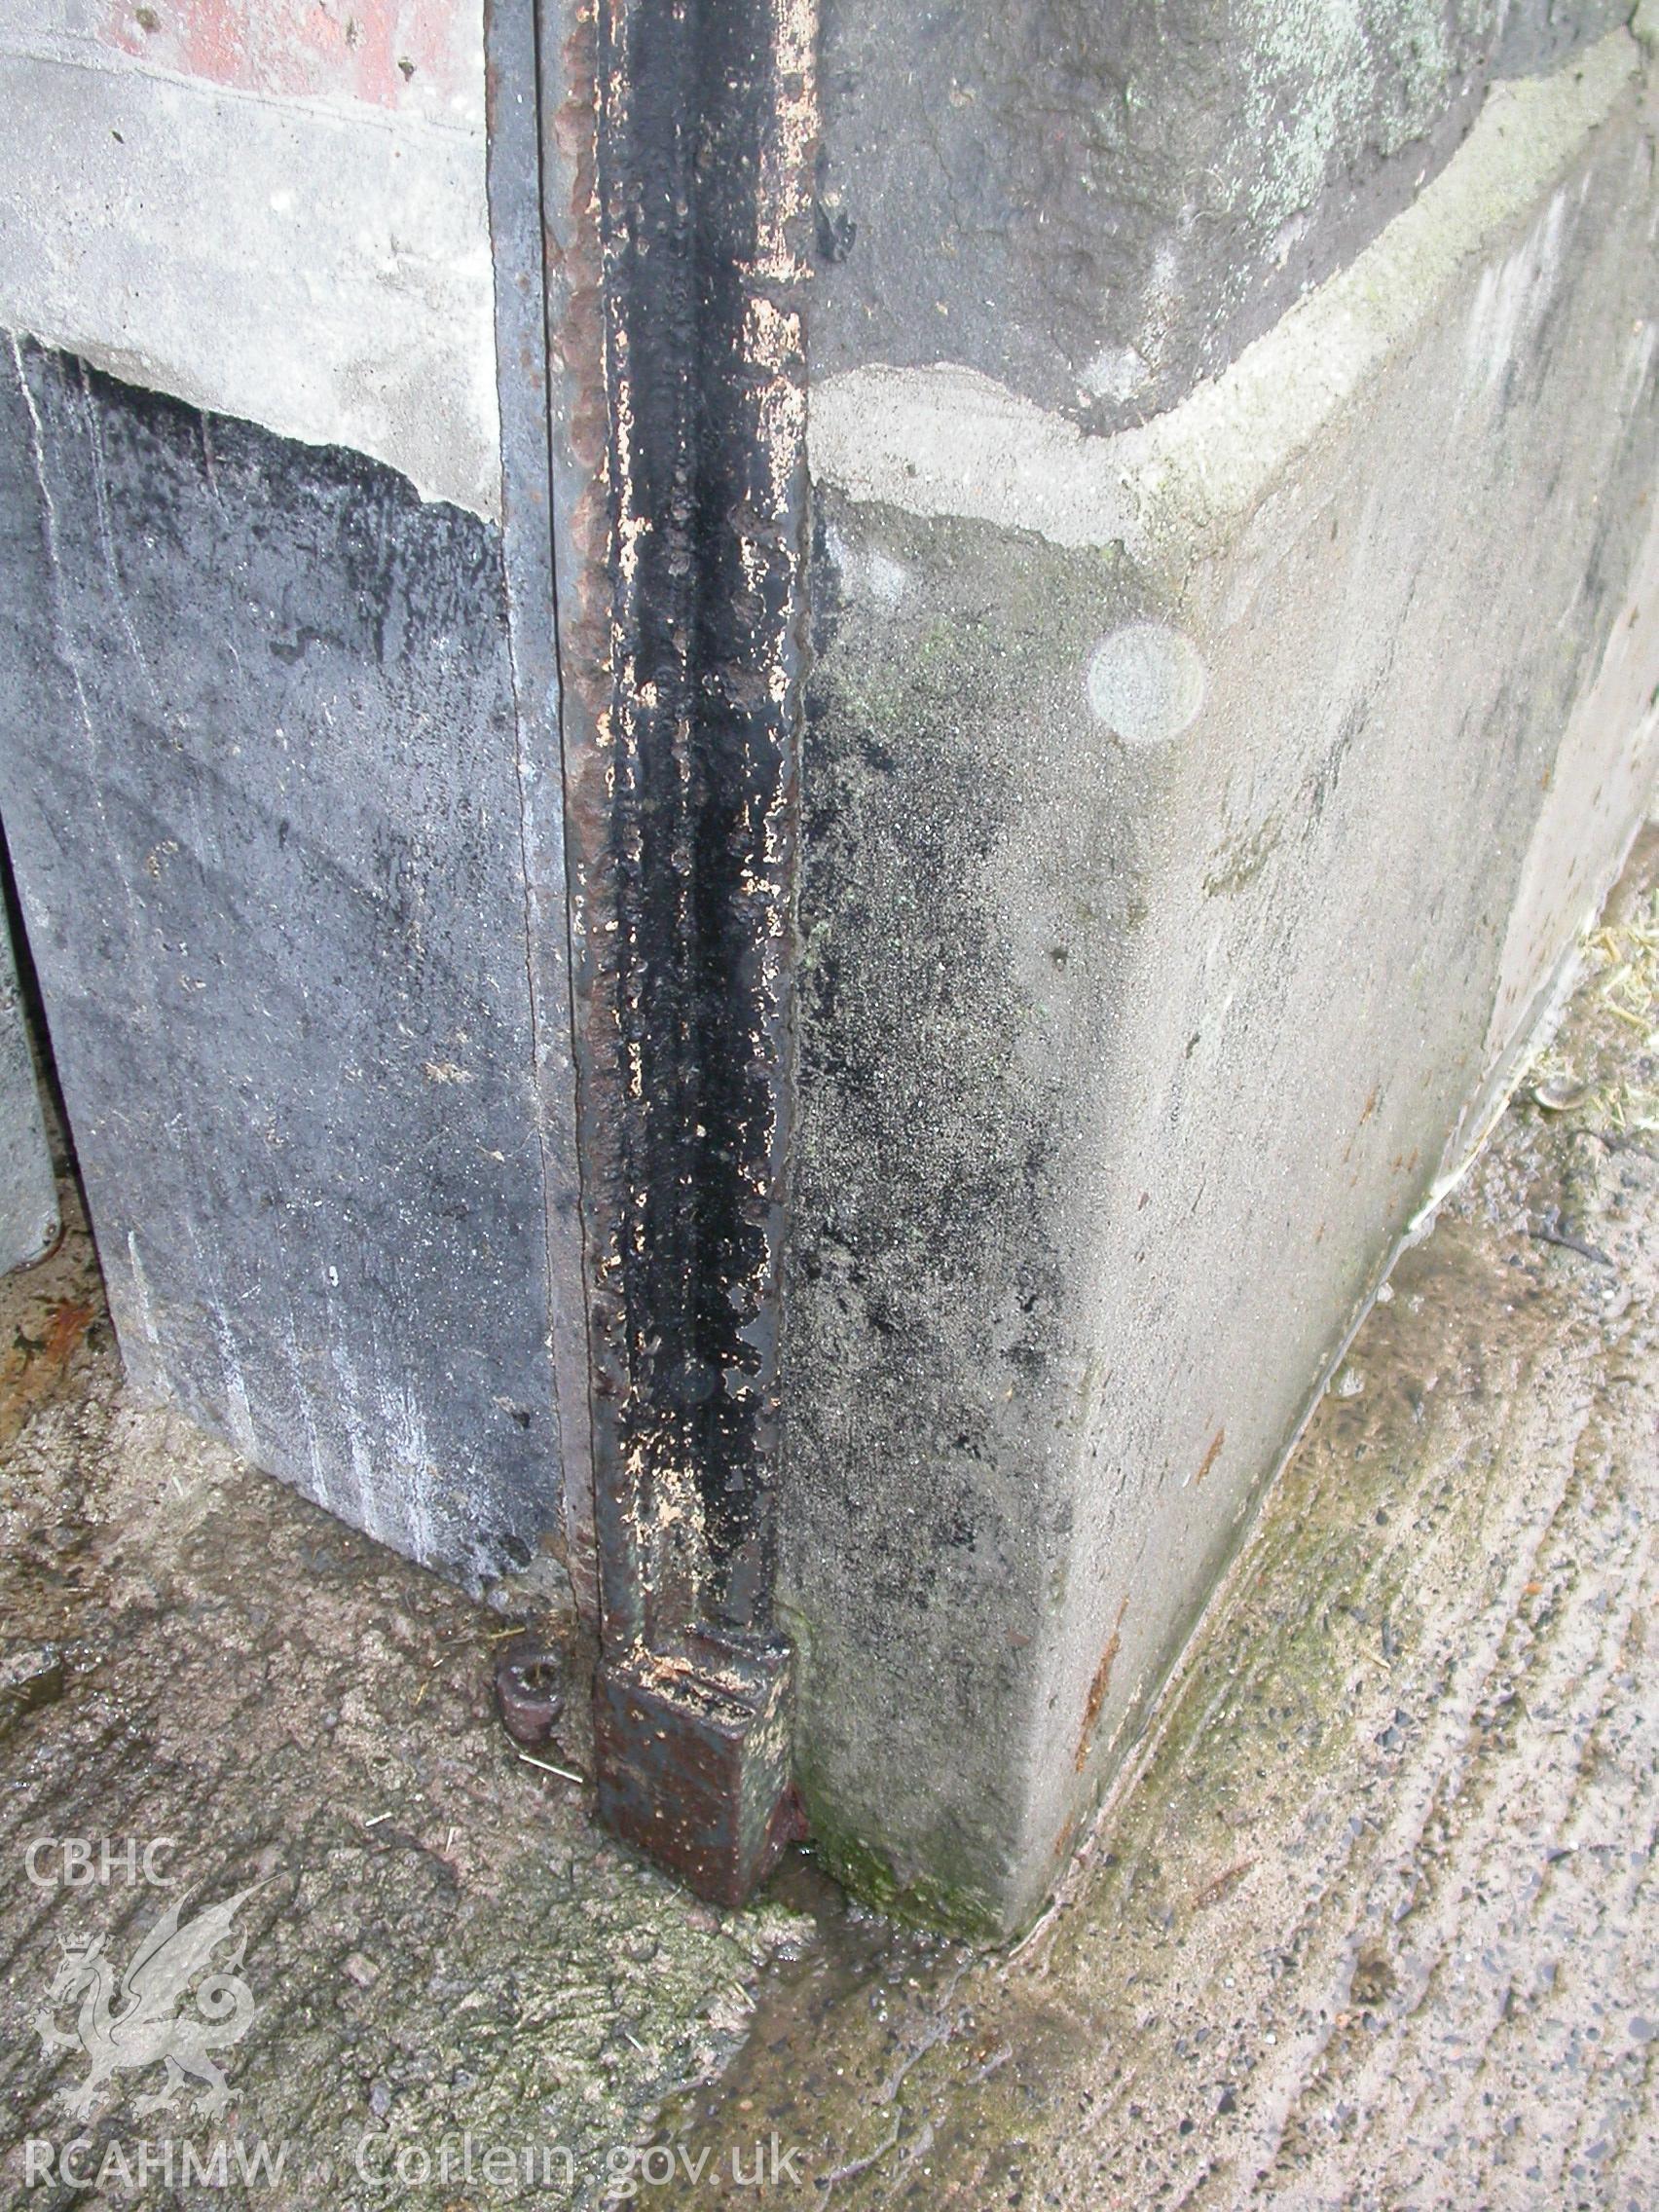 Digital colour photograph showing detail of a door frame and hinge bracket at the gable end of the South range of Newport Cattle market.